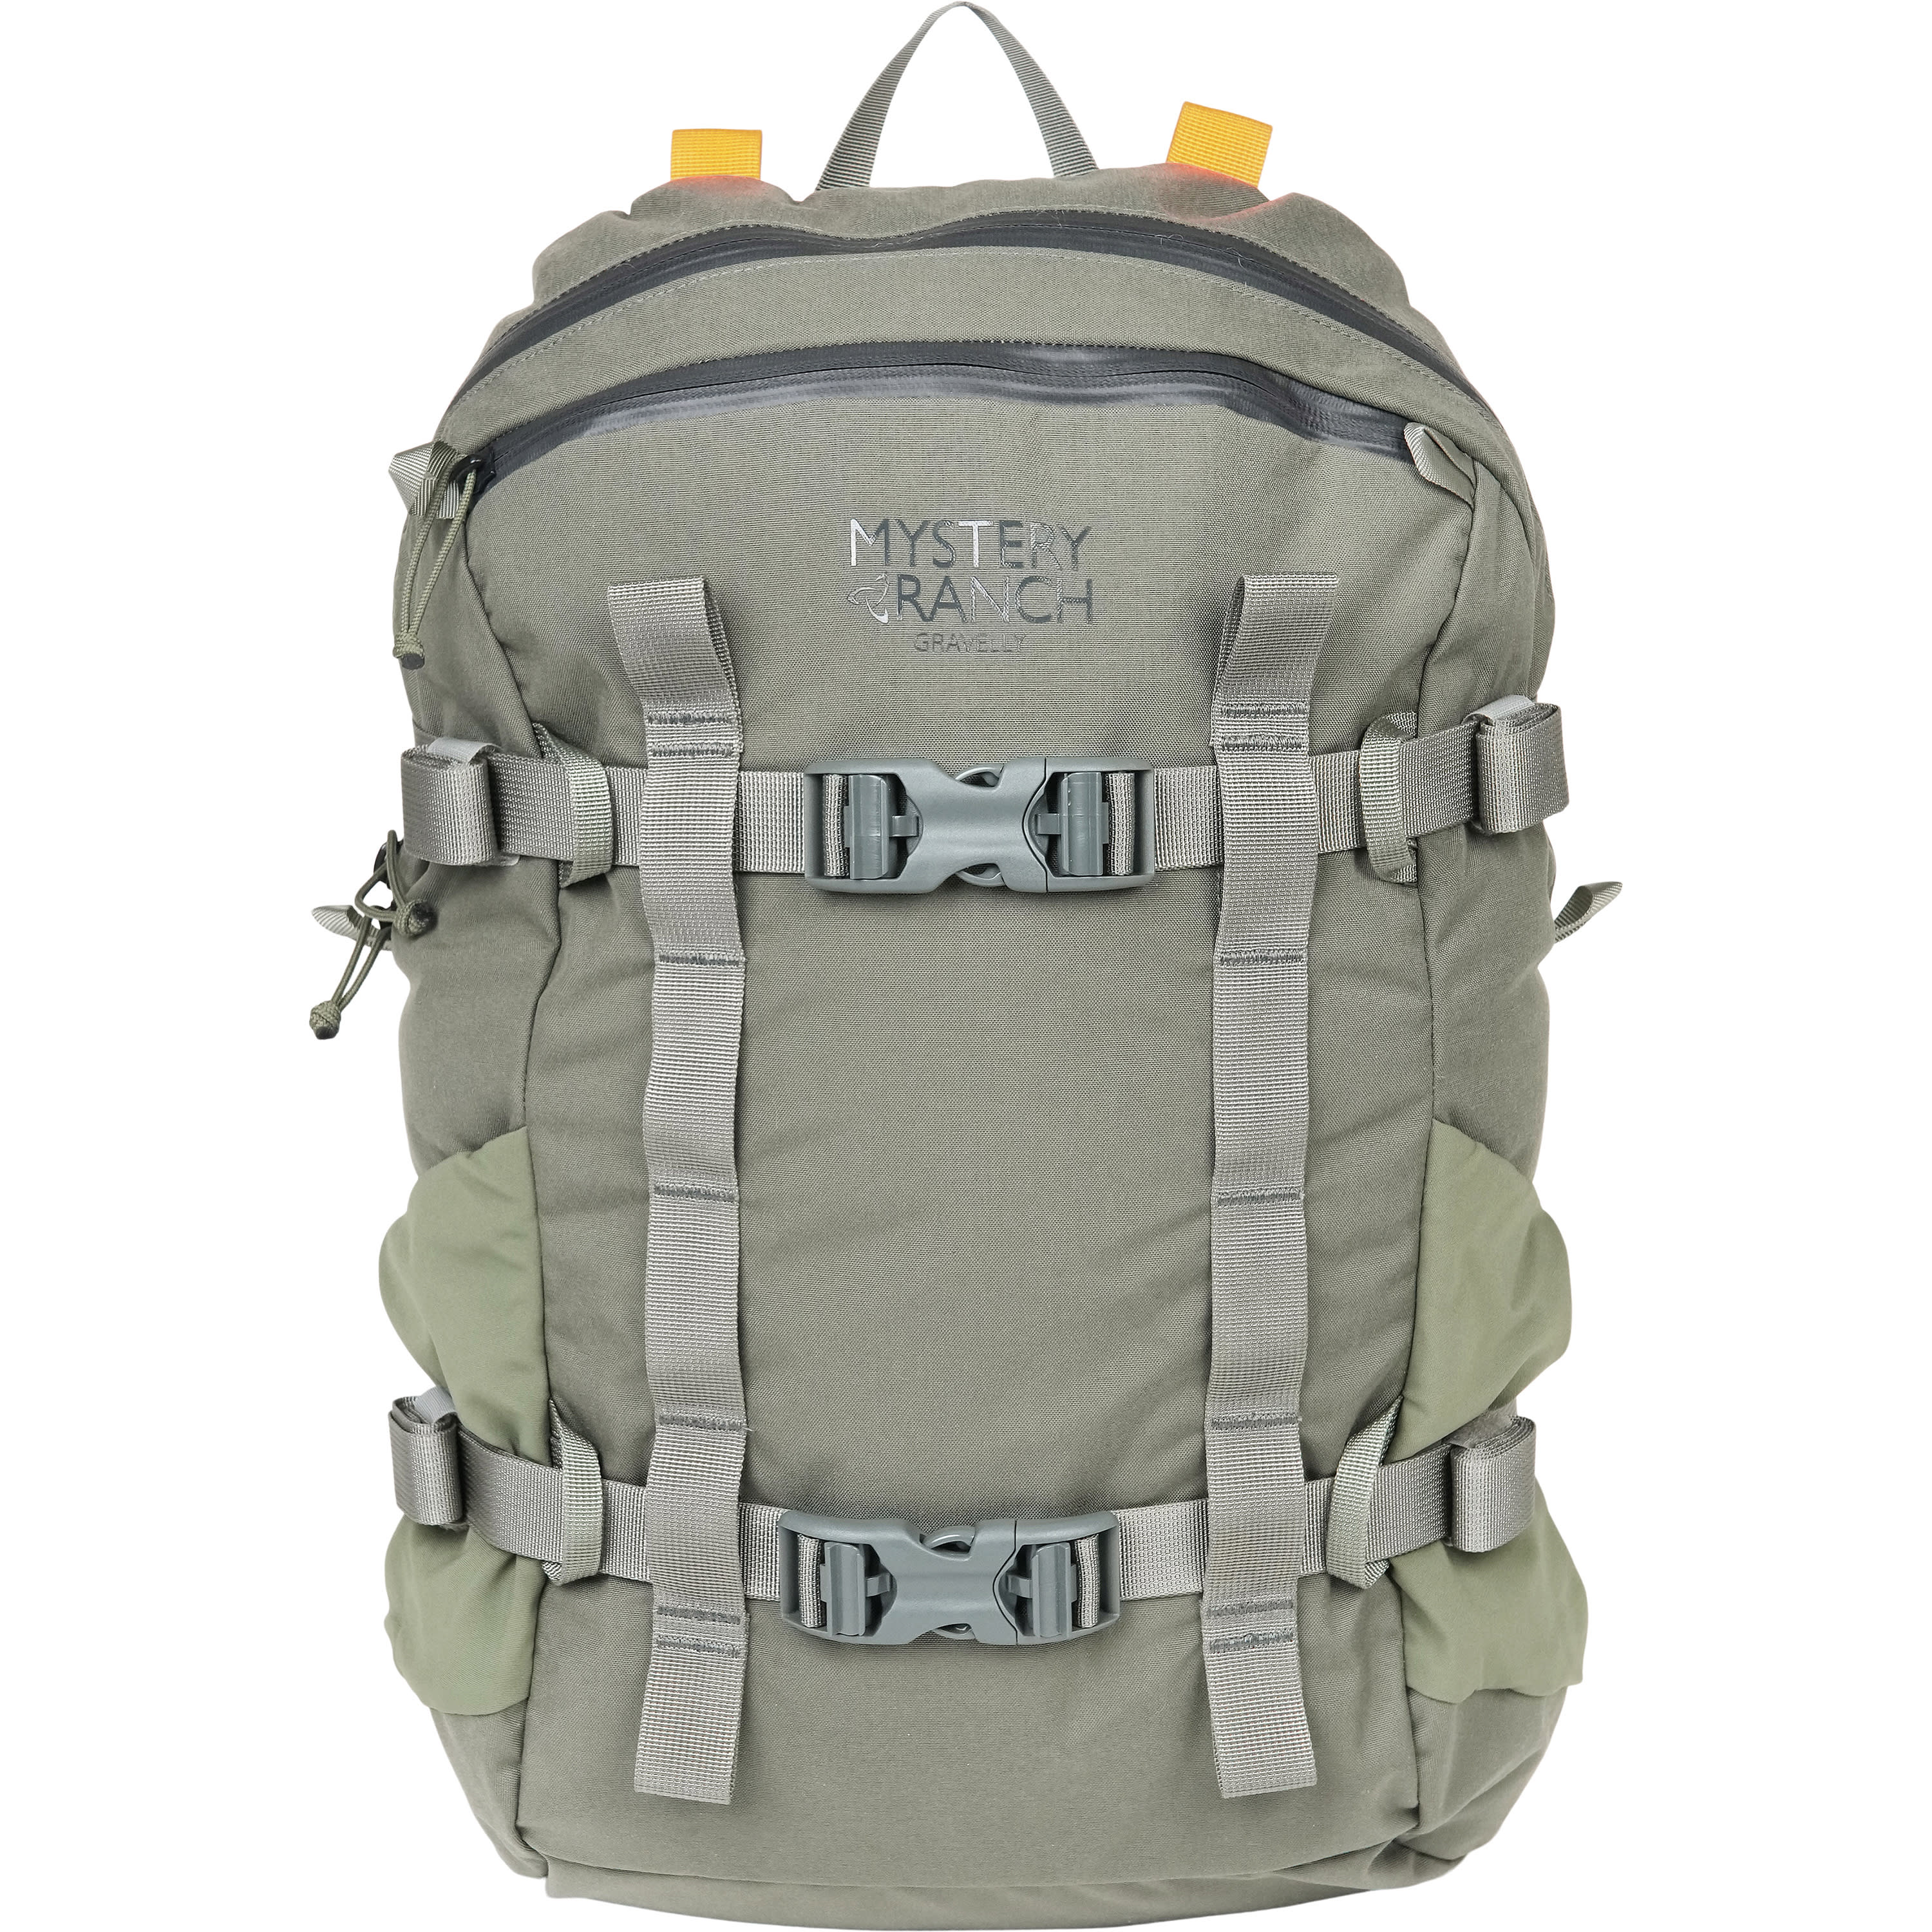 Mystery Ranch Gravelly 18 Backpack